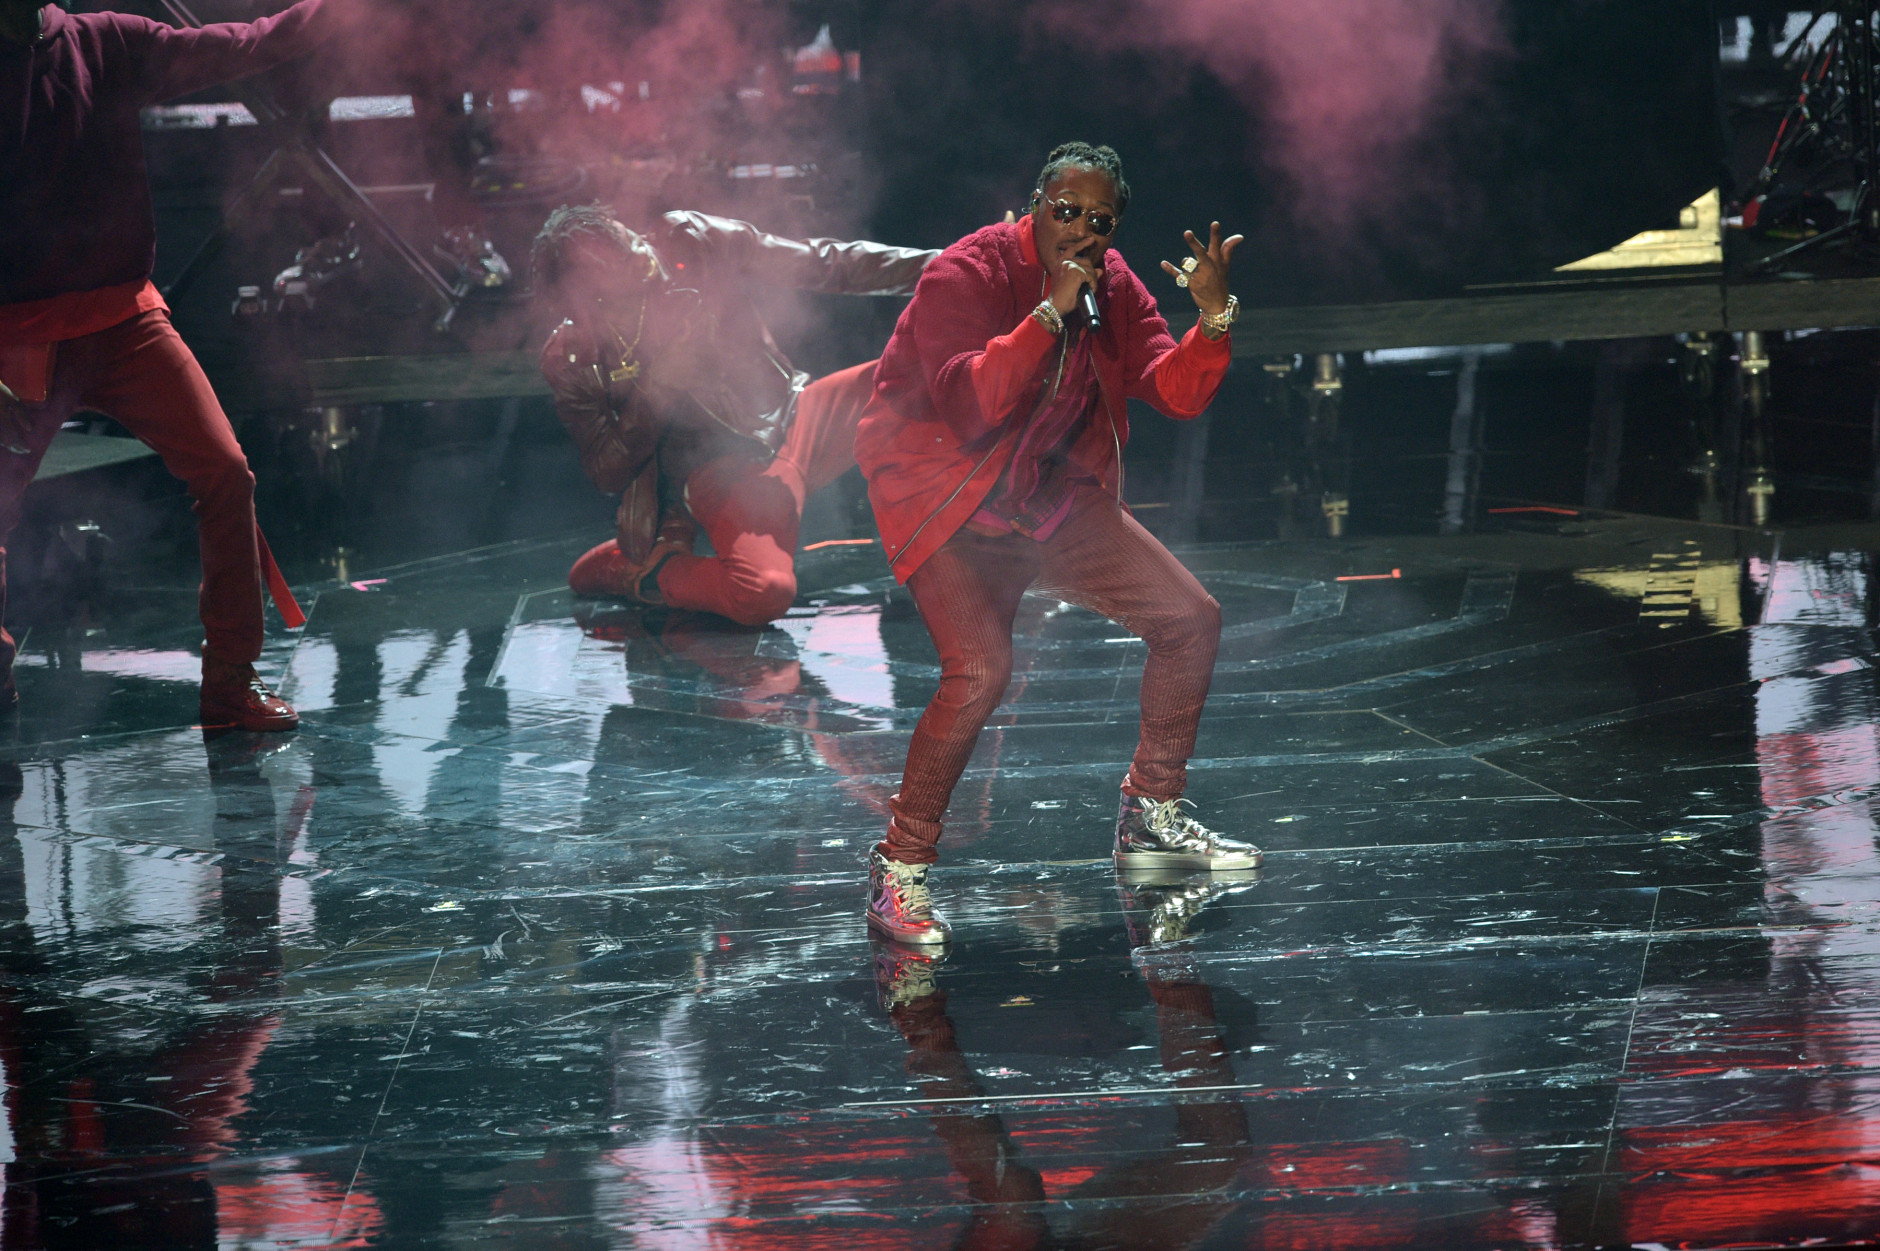 NEW YORK, NY - AUGUST 28:  Future performs onstage during the 2016 MTV Video Music Awards at Madison Square Garden on August 28, 2016 in New York City.  (Photo by Jason Kempin/Getty Images)